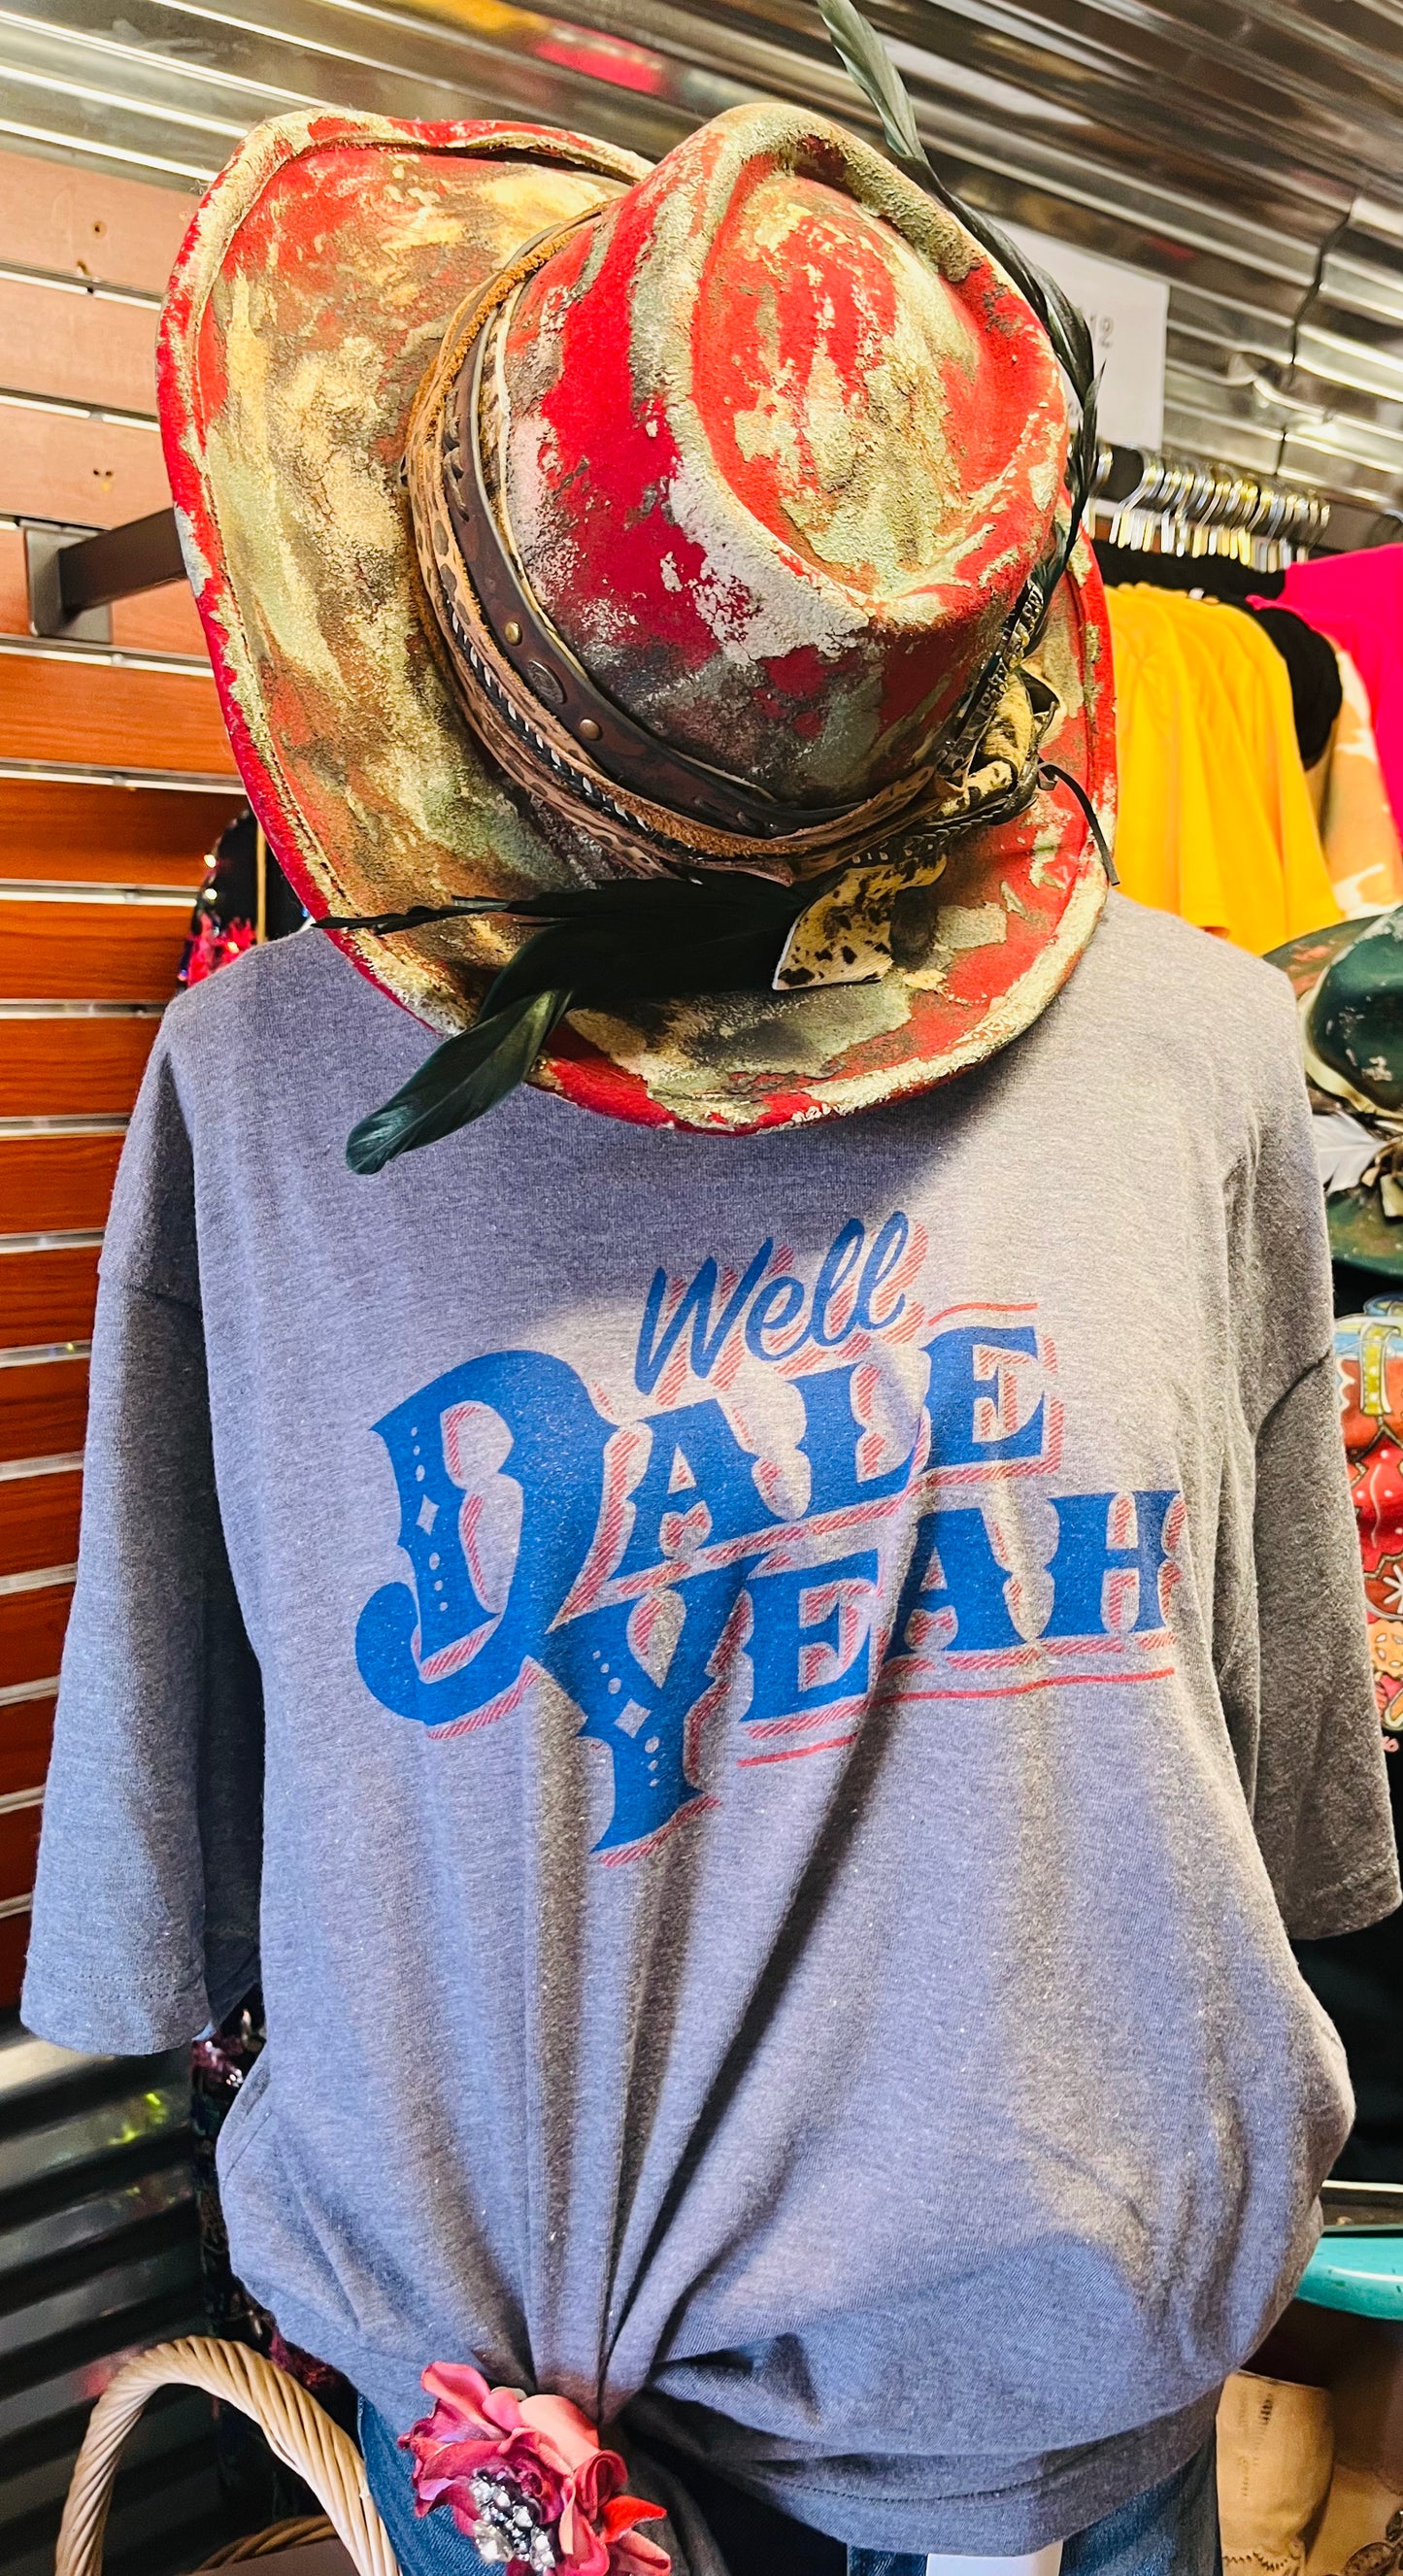 Well Dale Yeah t-shirt 30% off! - Dale Brisby